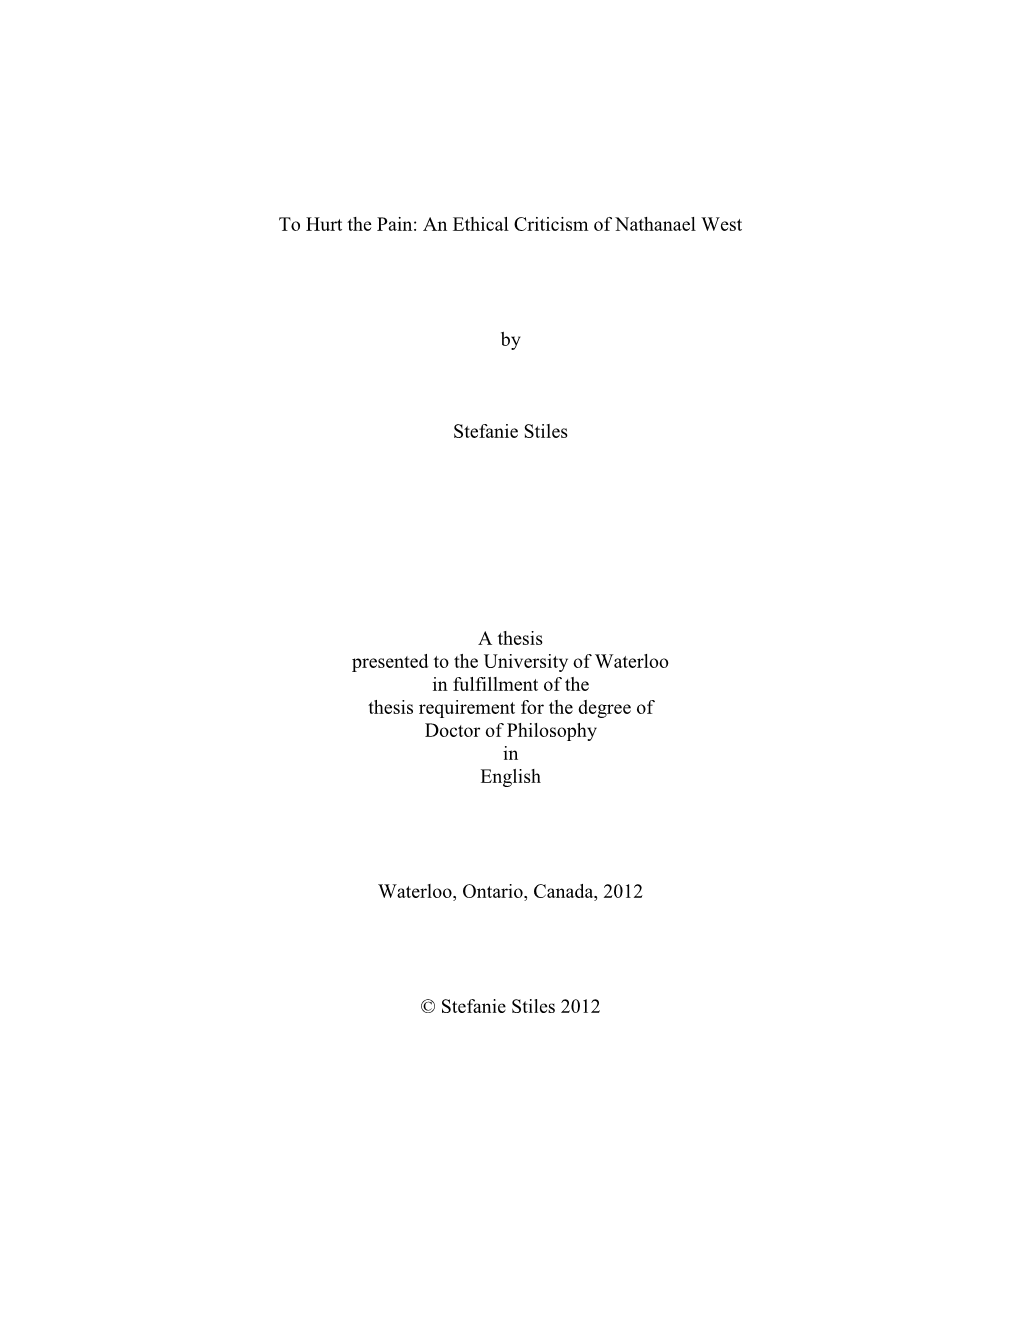 An Ethical Criticism of Nathanael West by Stefanie Stiles a Thesis